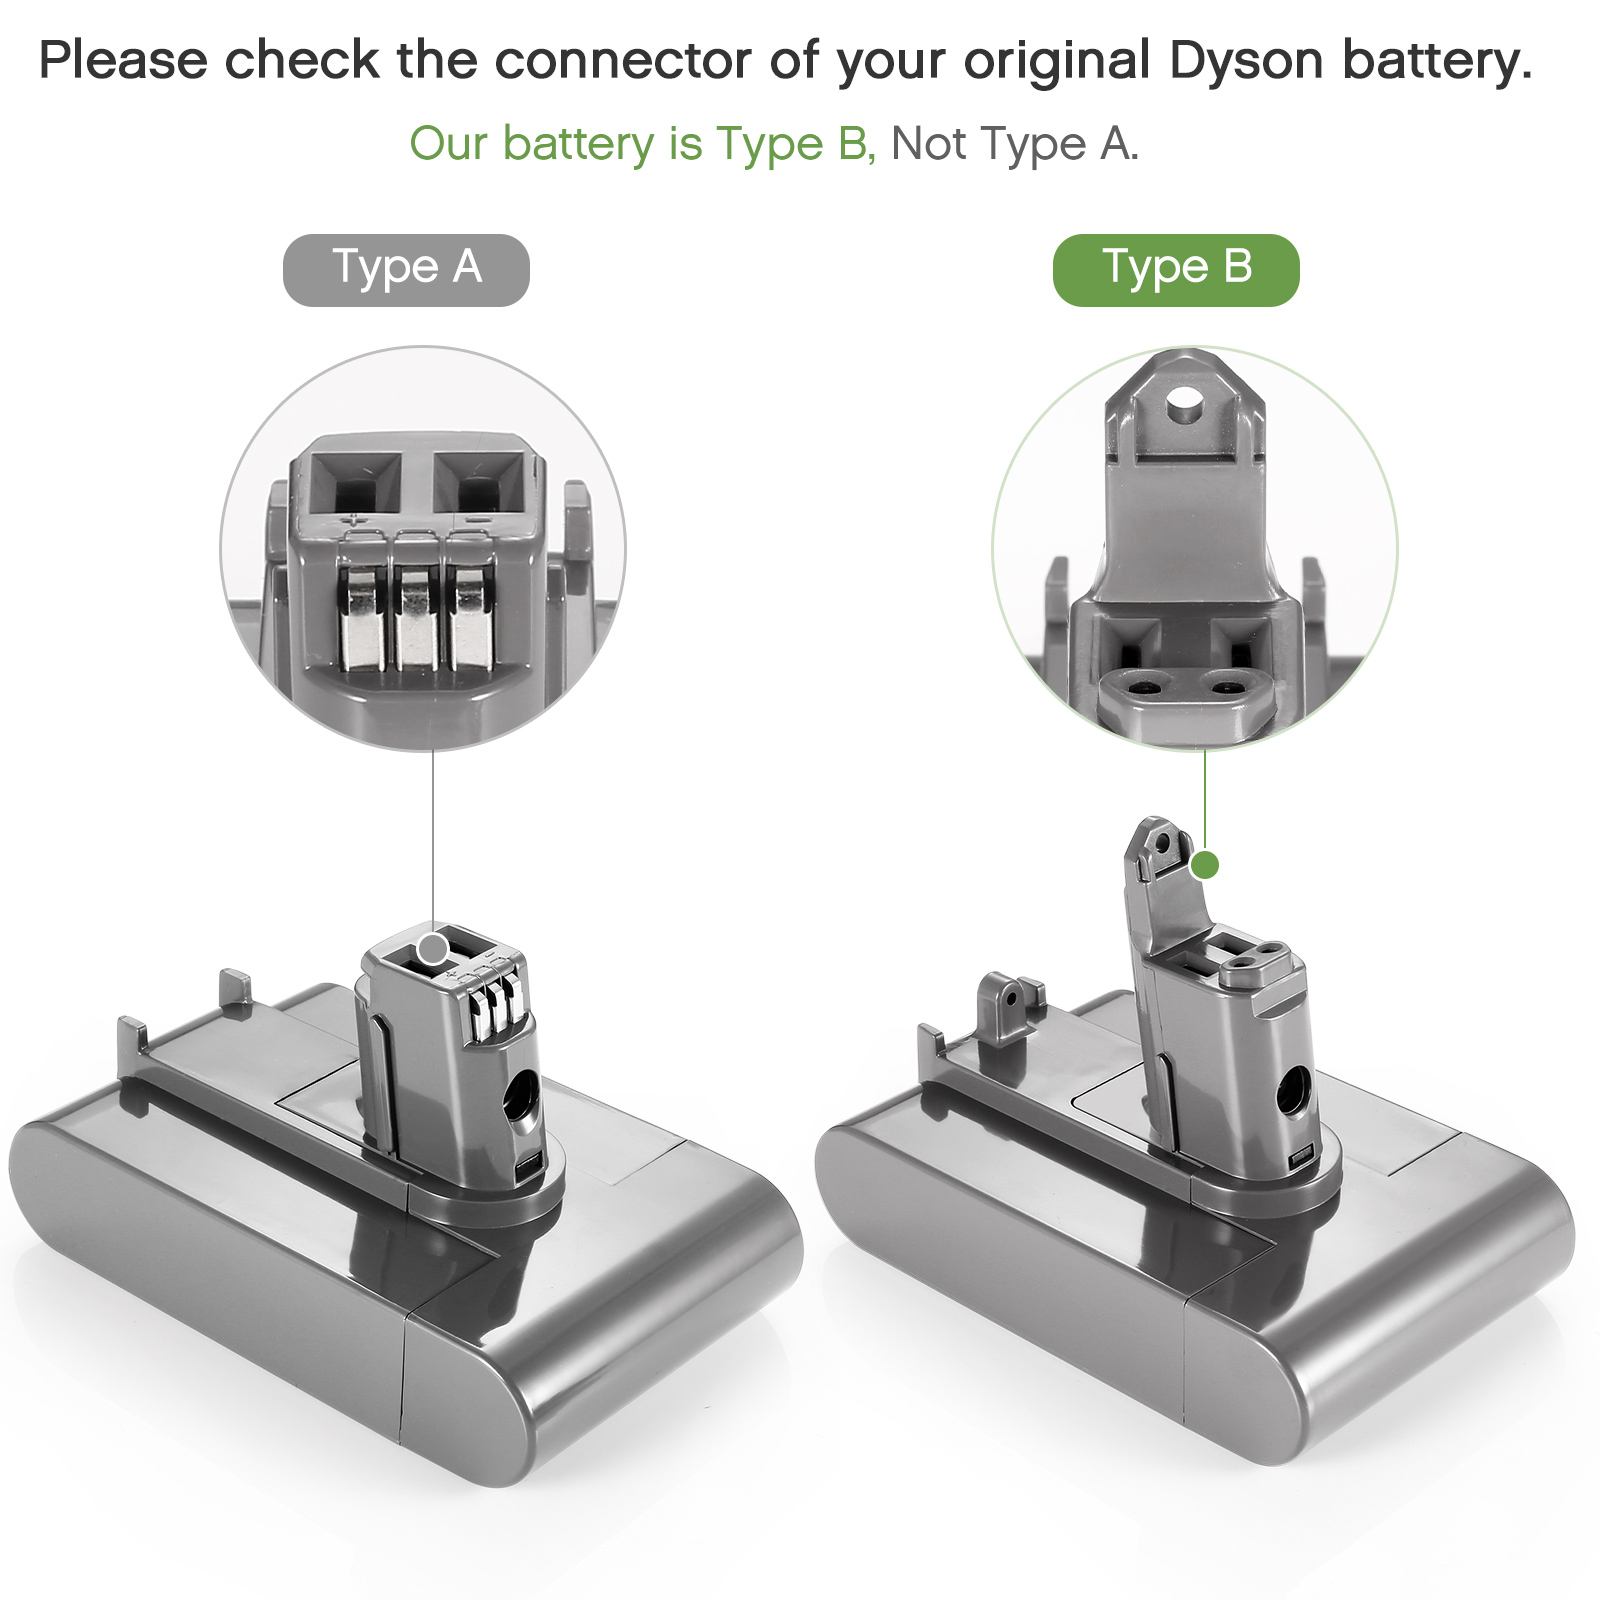 Battery Adapter for Replacement for Dyson Type-B 22.2V 4000MaH DC31 DC34 DC35,Only Fit for Type B, Not for Type A